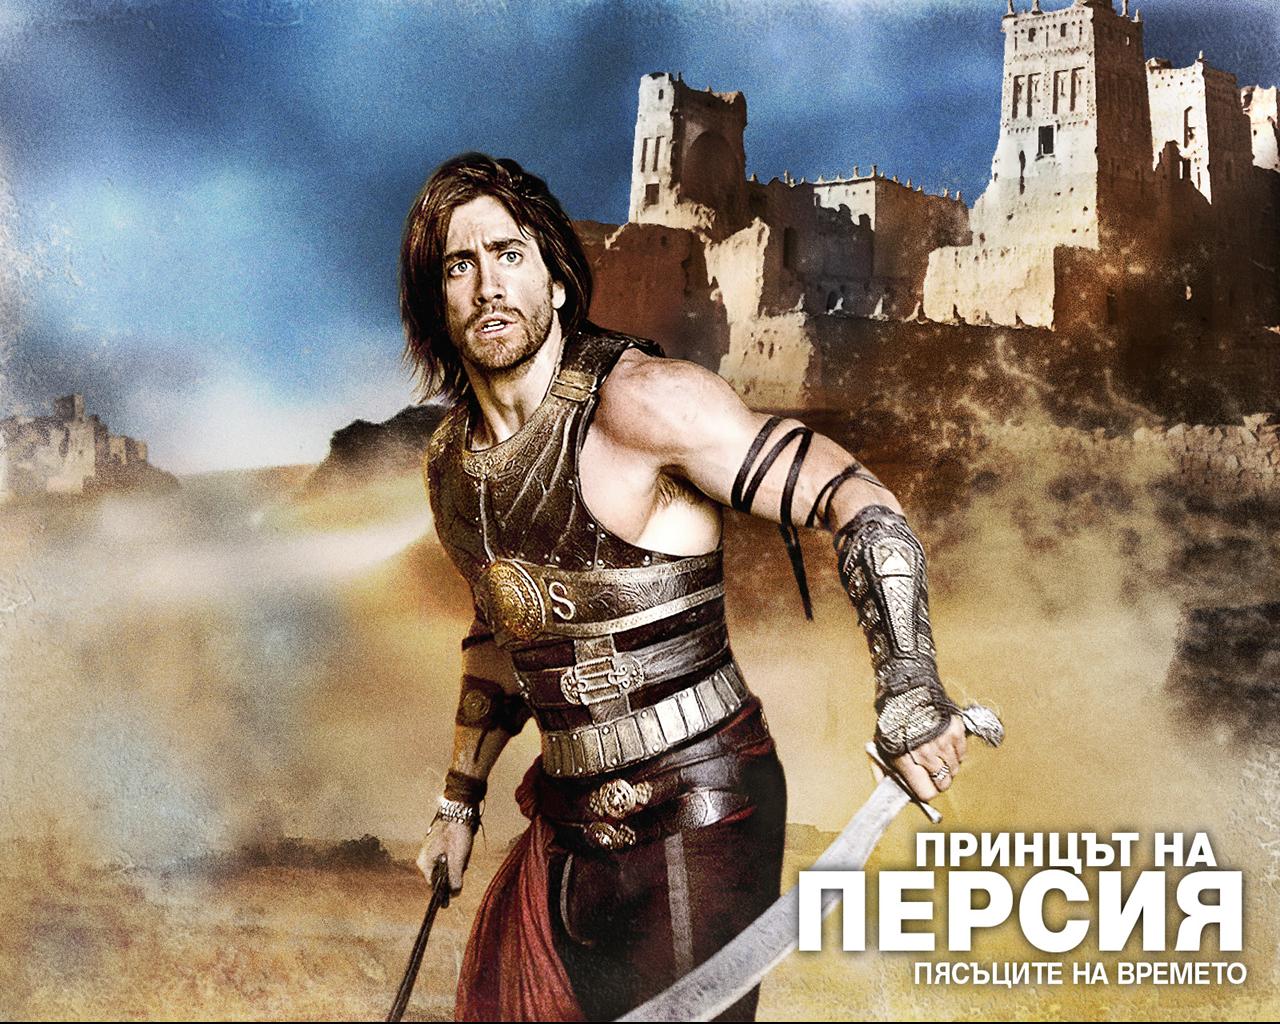 Picture Prince of Persia - Movies Prince of Persia film